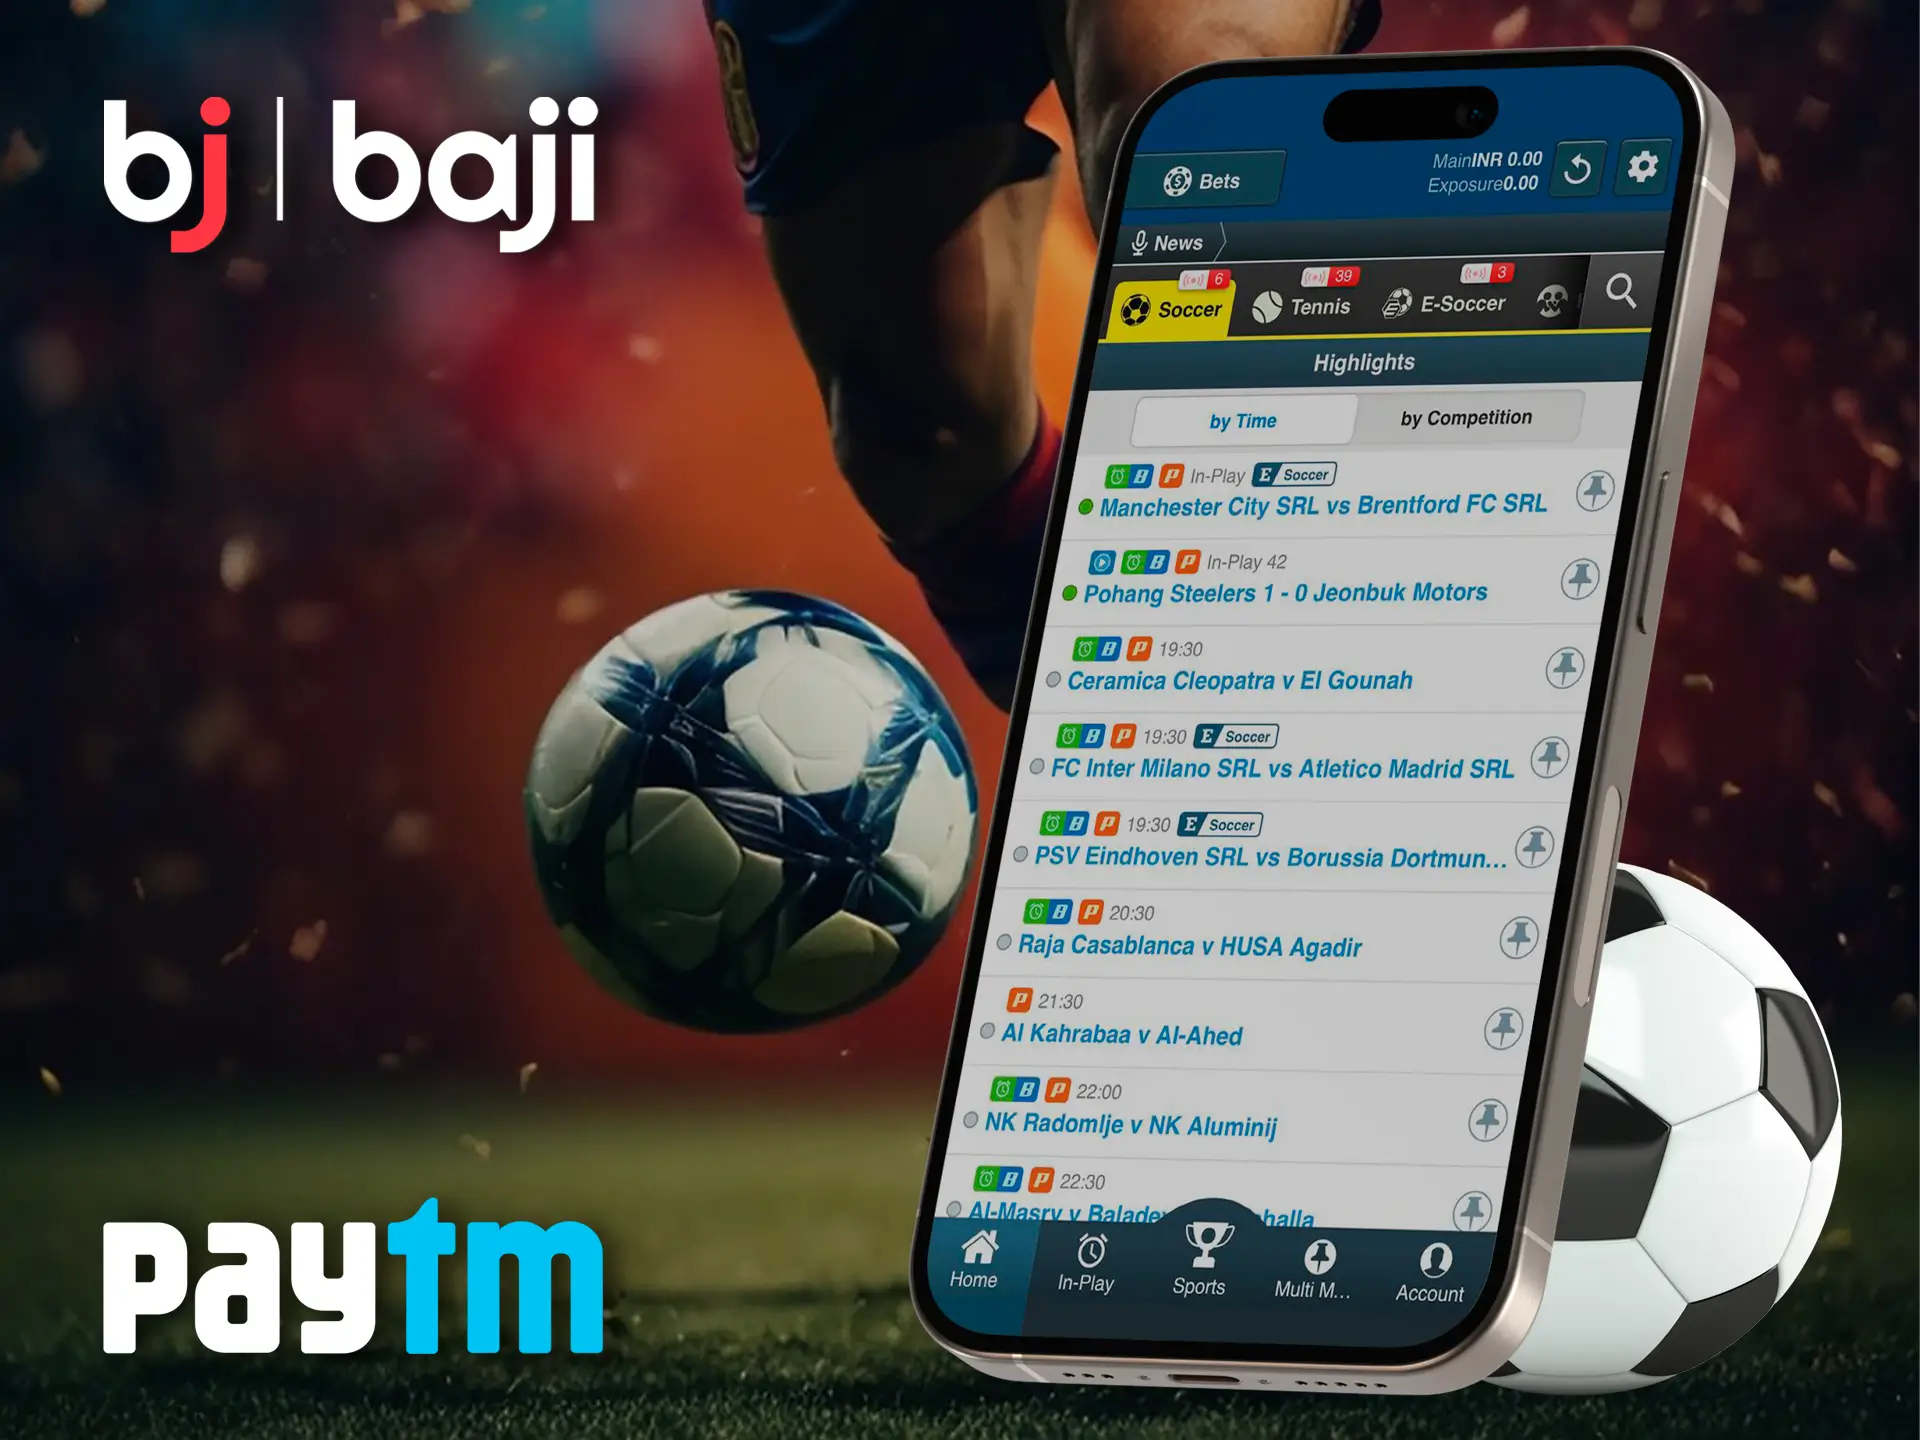 Place your bets on the Baji app and withdraw via PayTm.